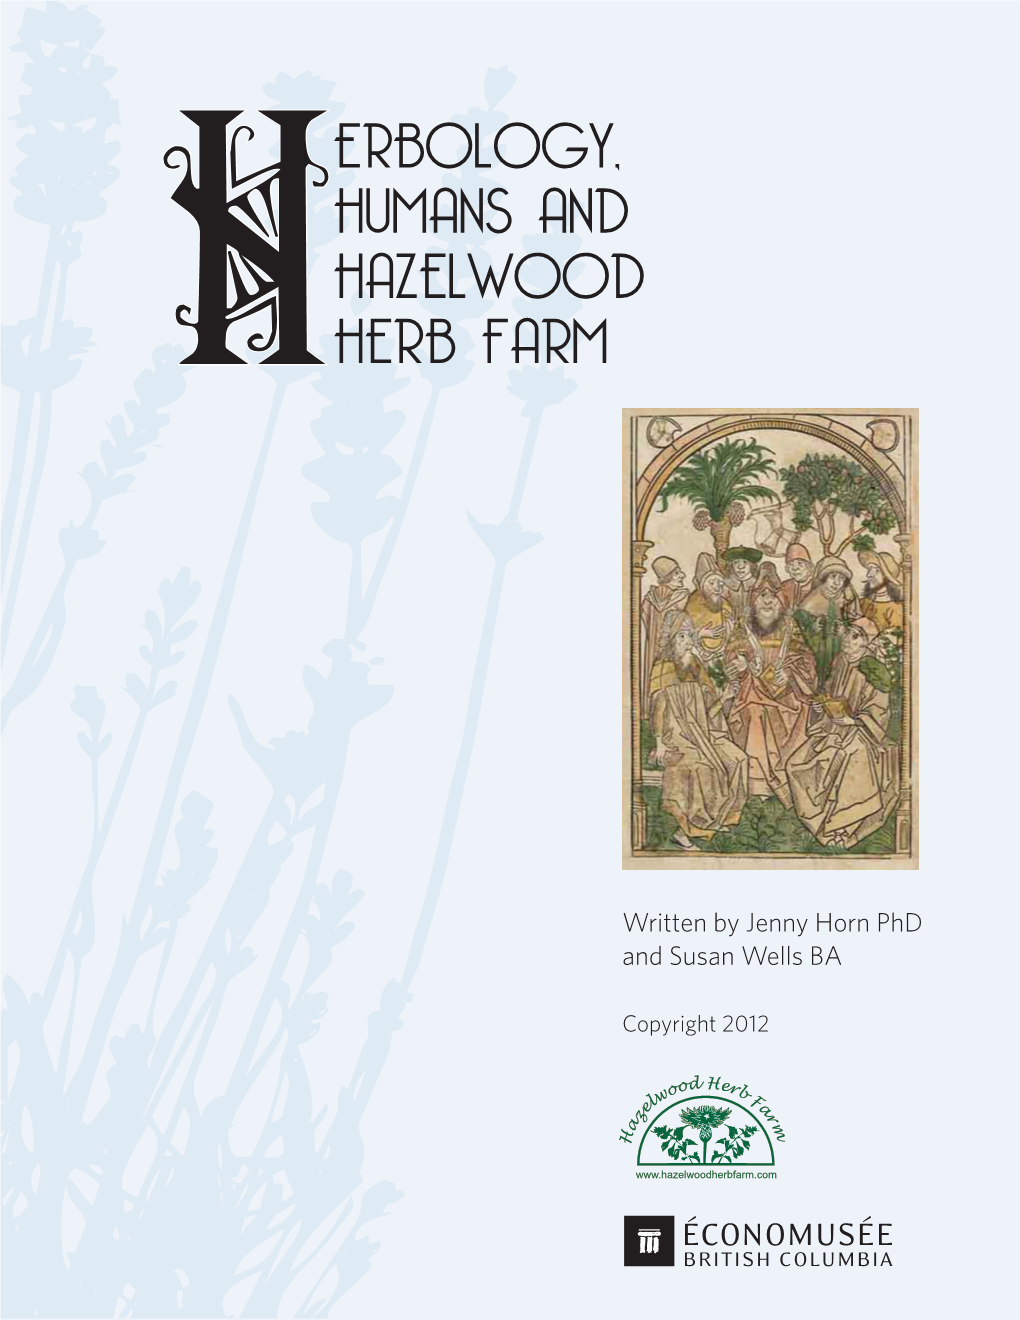 Herbology, Humans and Hazelwood Herb Farm